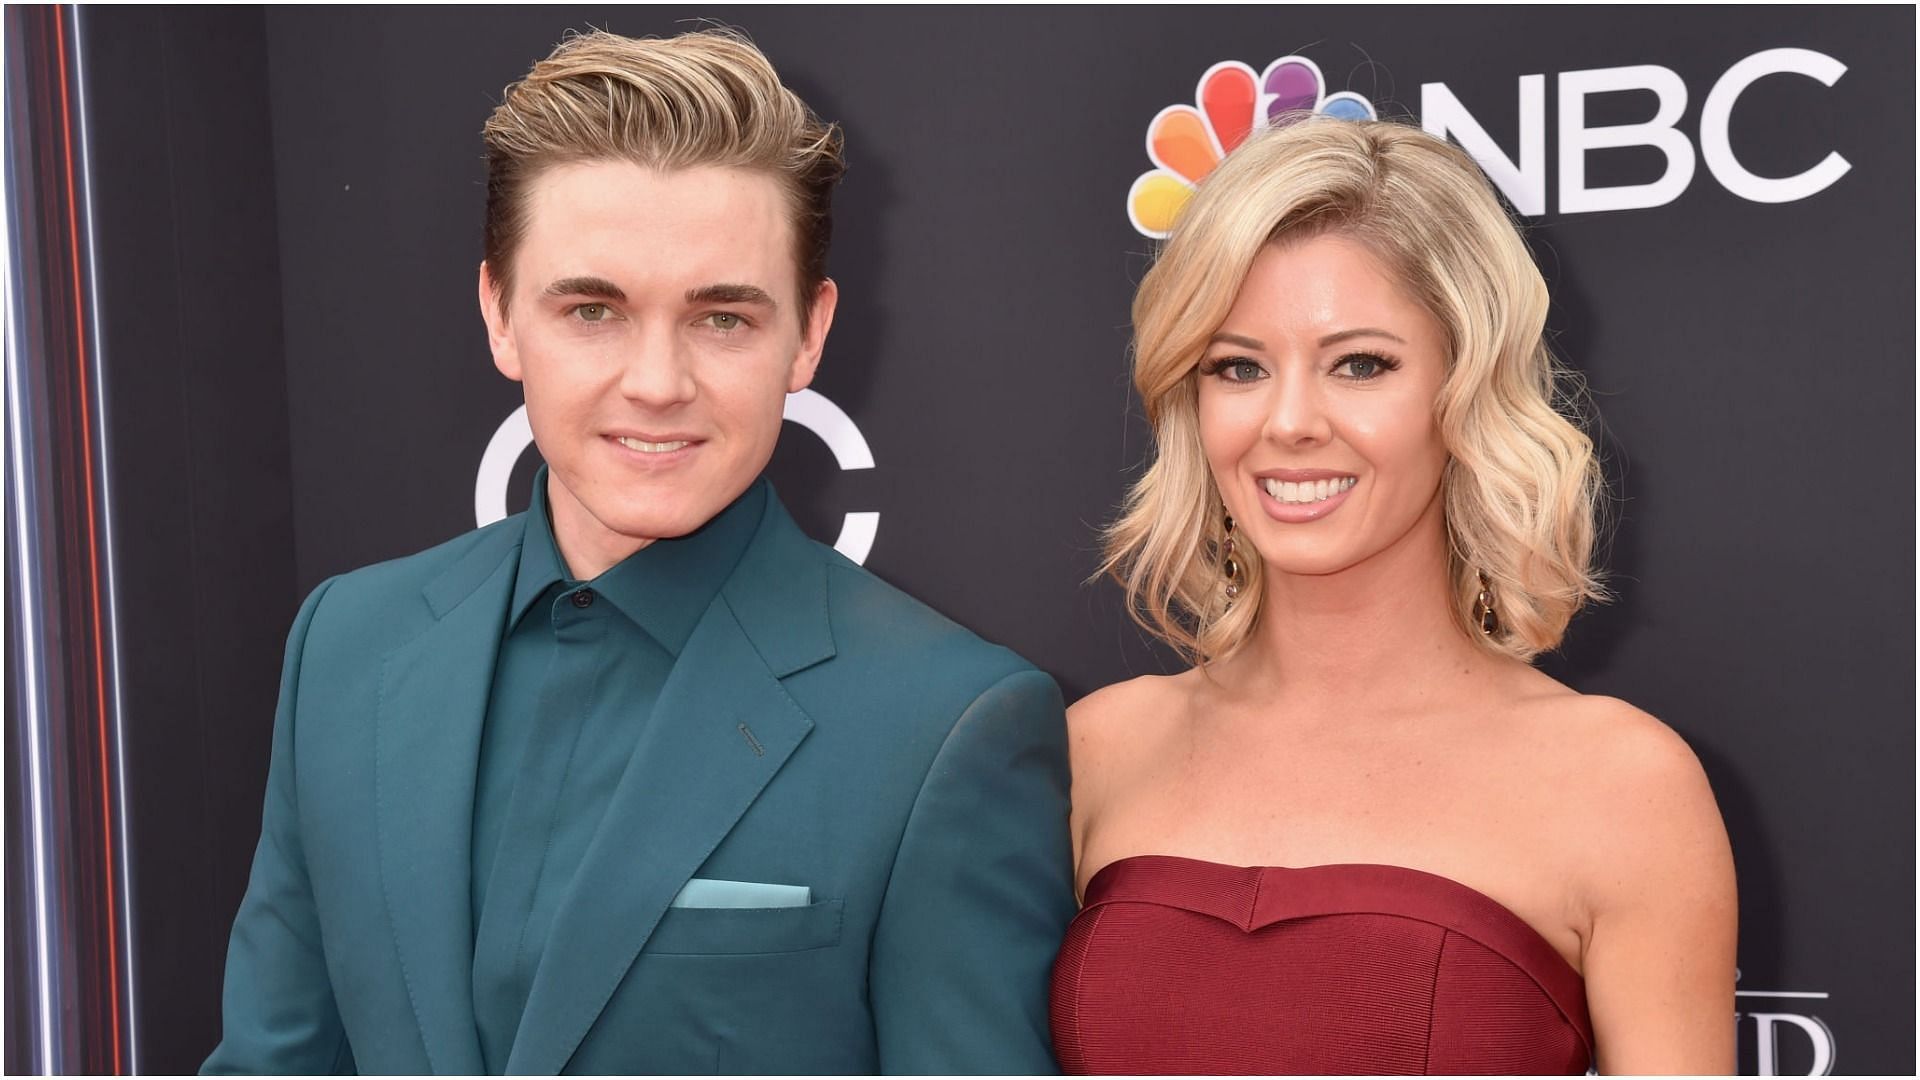 Jesse McCartney and Katie Peterson attend the 2018 Billboard Music Awards at MGM Grand Garden Arena on May 20, 2018 in Las Vegas, Nevada. (Image via Getty Images)